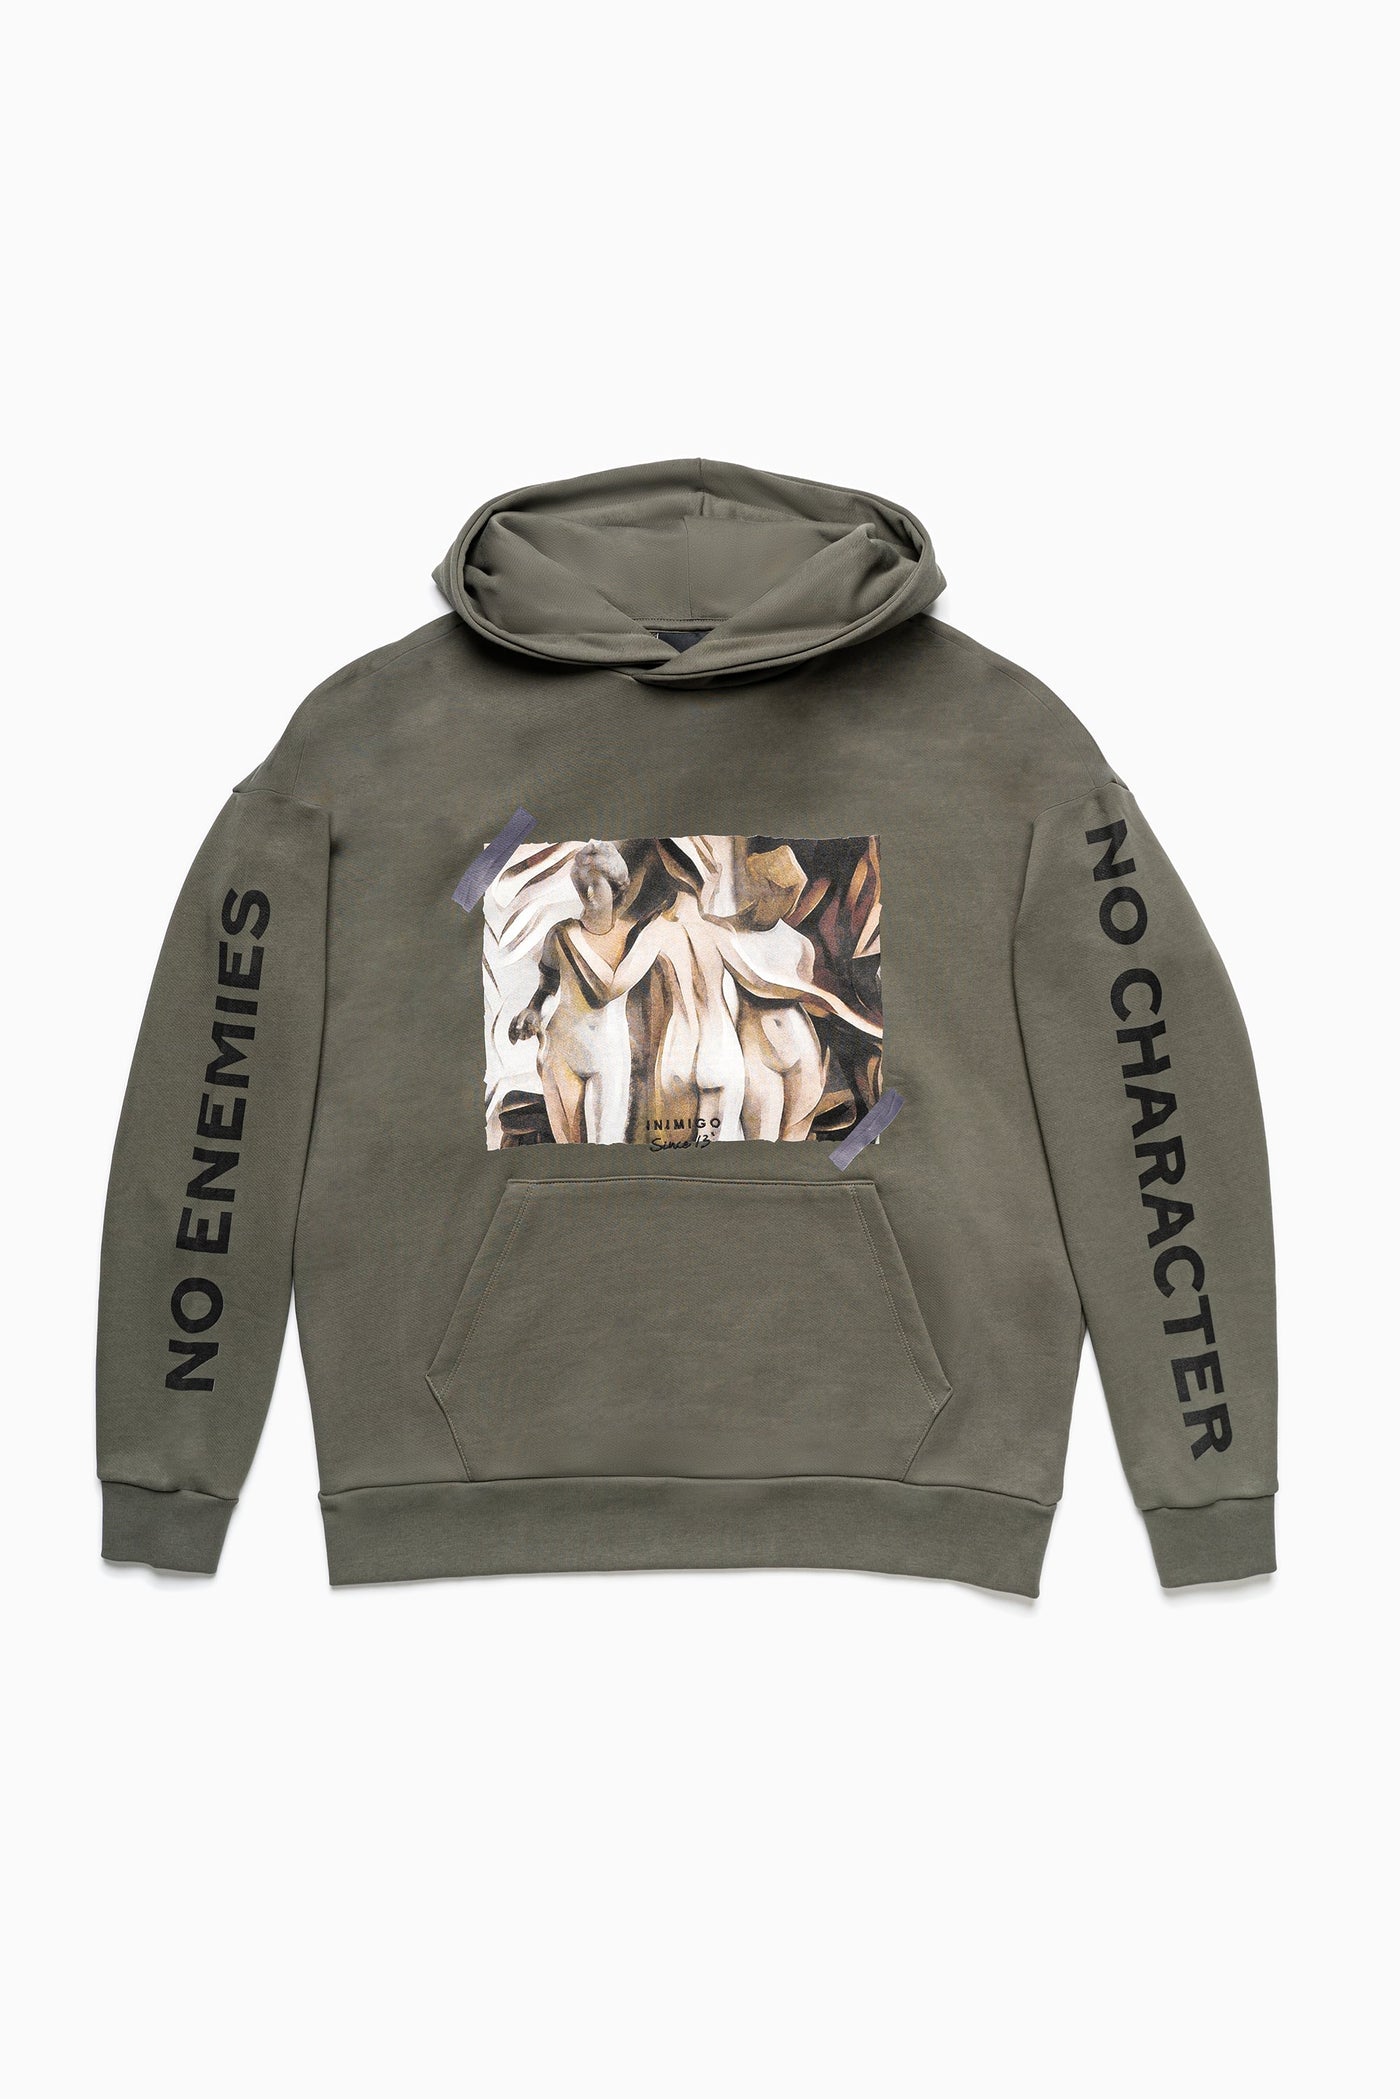 Glamour Cubism Print Oversized Hoodie